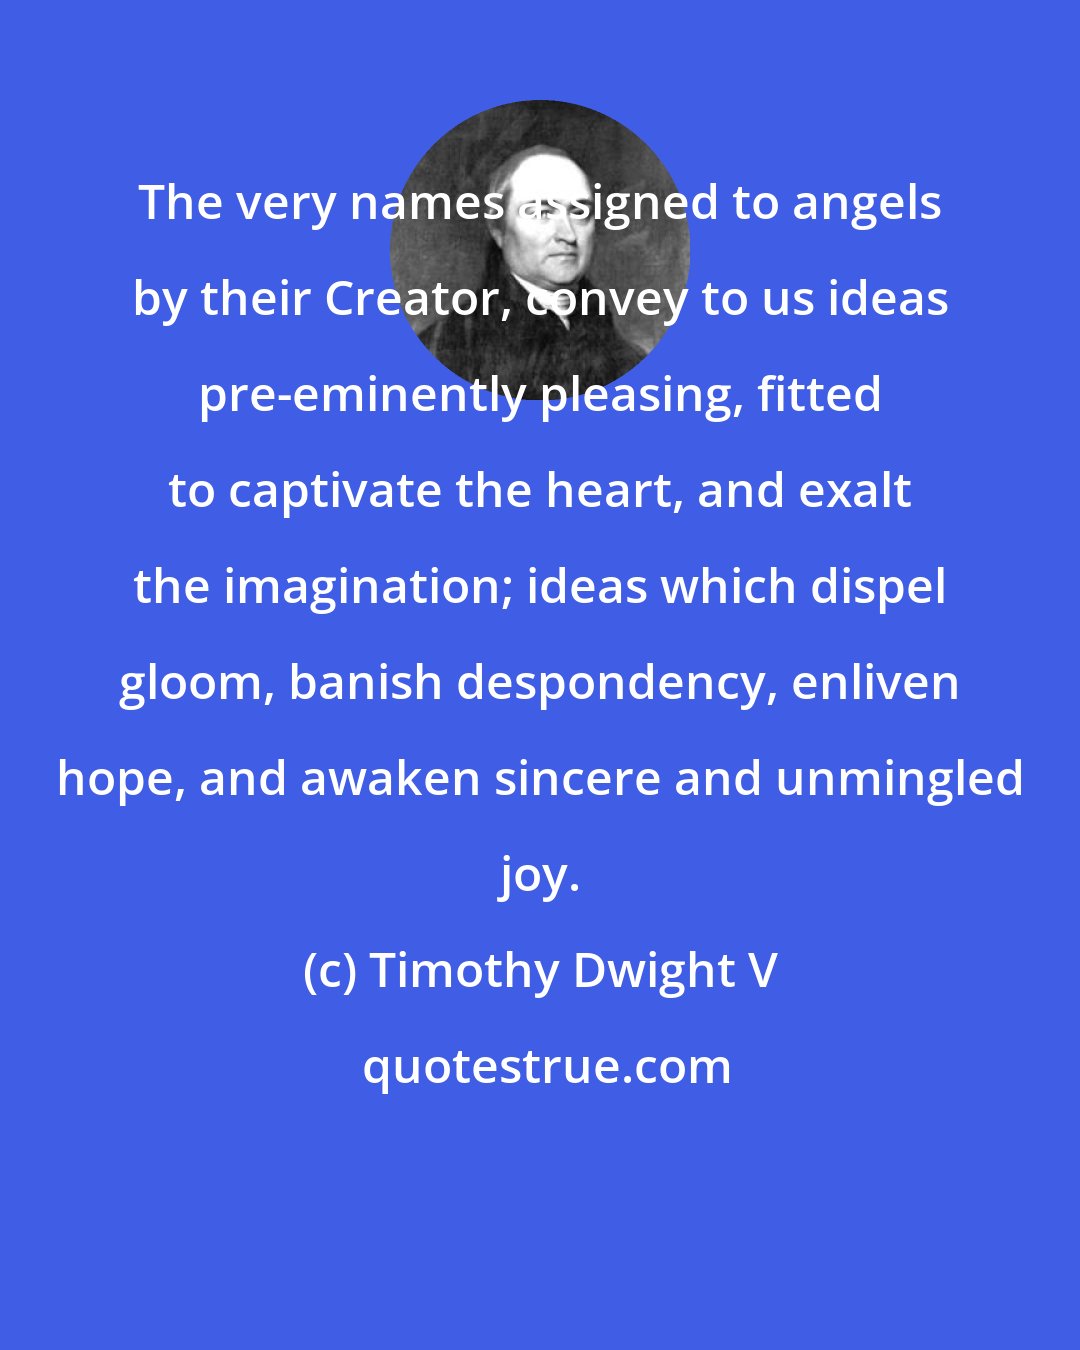 Timothy Dwight V: The very names assigned to angels by their Creator, convey to us ideas pre-eminently pleasing, fitted to captivate the heart, and exalt the imagination; ideas which dispel gloom, banish despondency, enliven hope, and awaken sincere and unmingled joy.